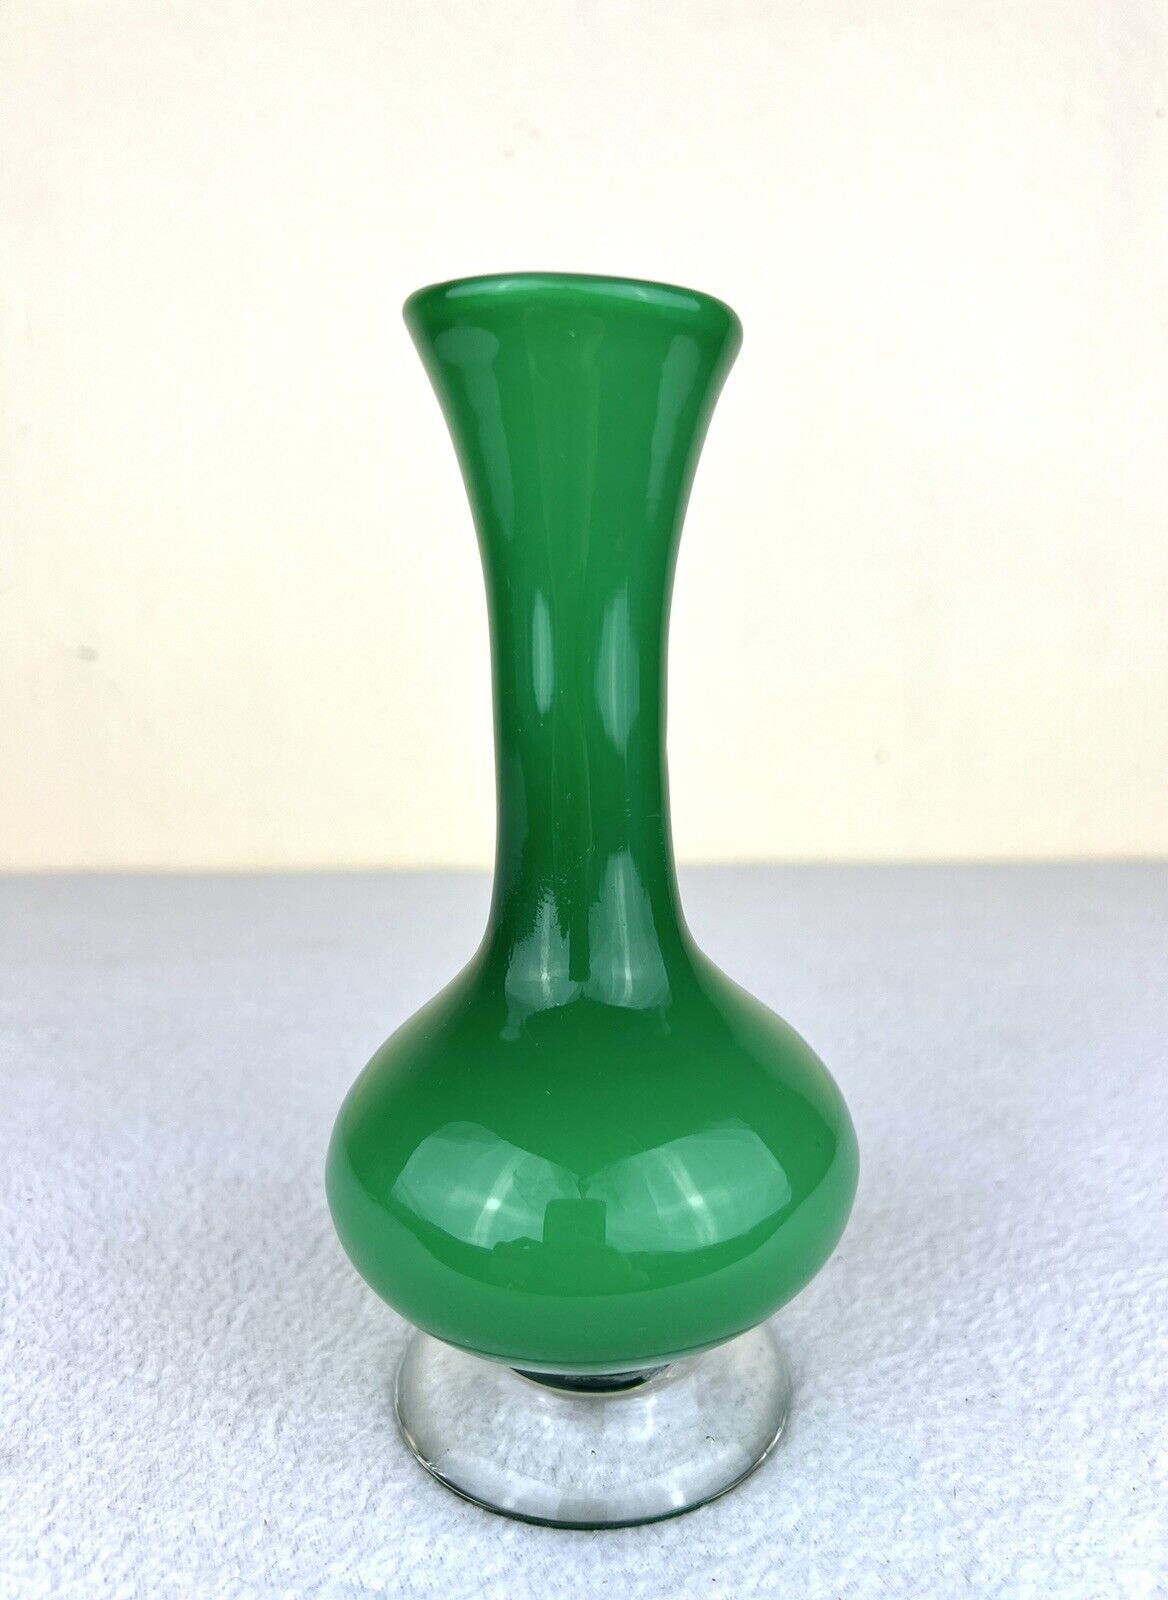 Vintage Handblown Small Green Glass Vase With Clear Stemmed Bottom 6.5” MCM